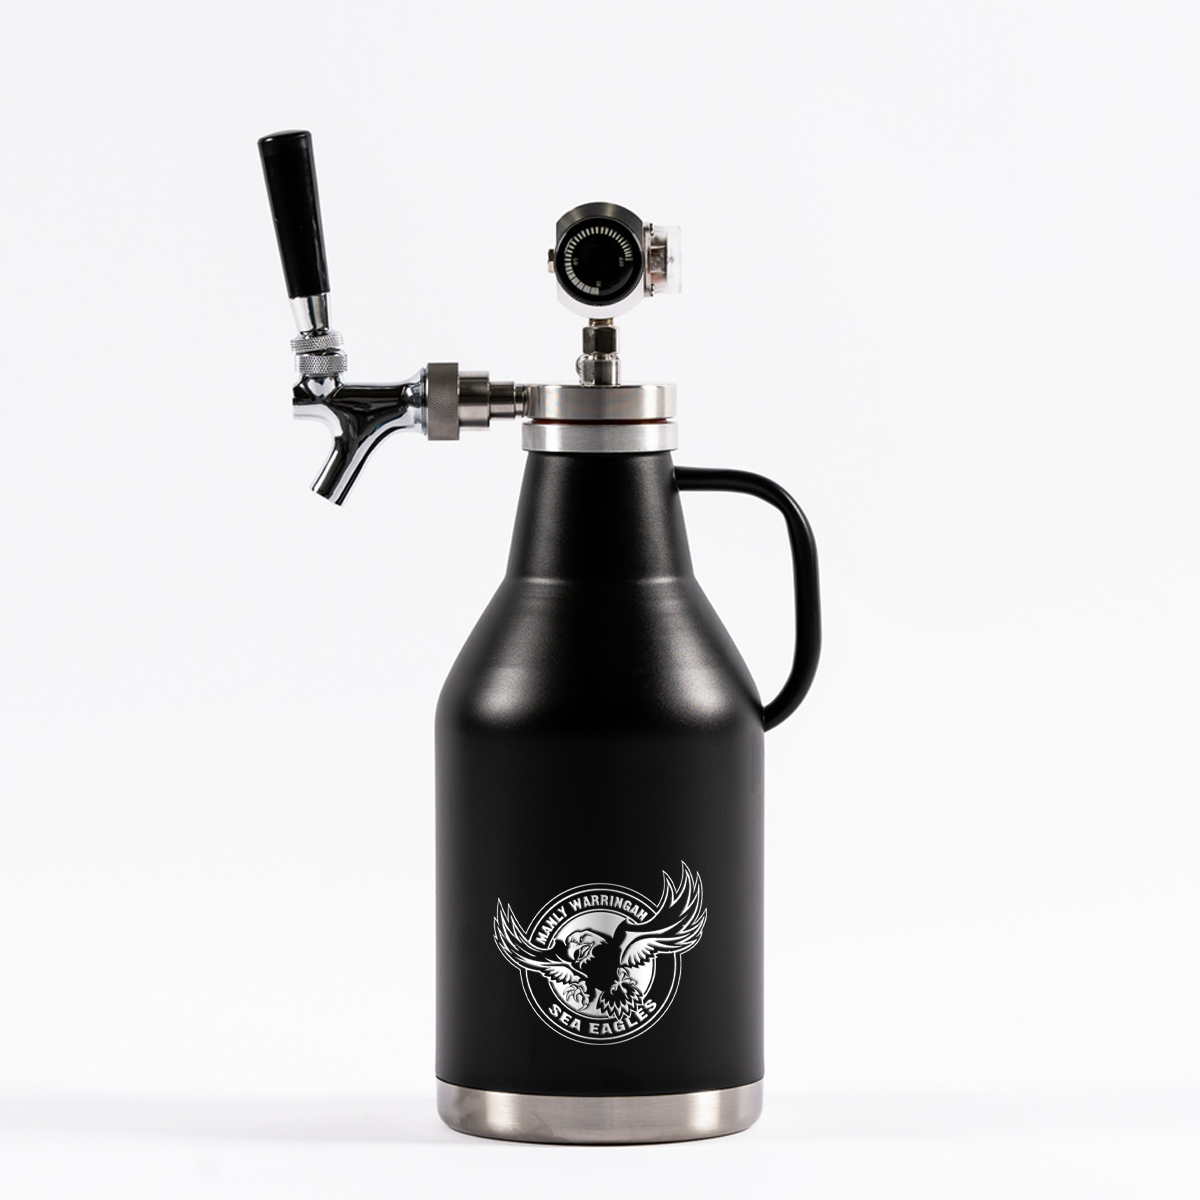 Manly Sea Eagles NRL Beer Growler 2L With Tap System